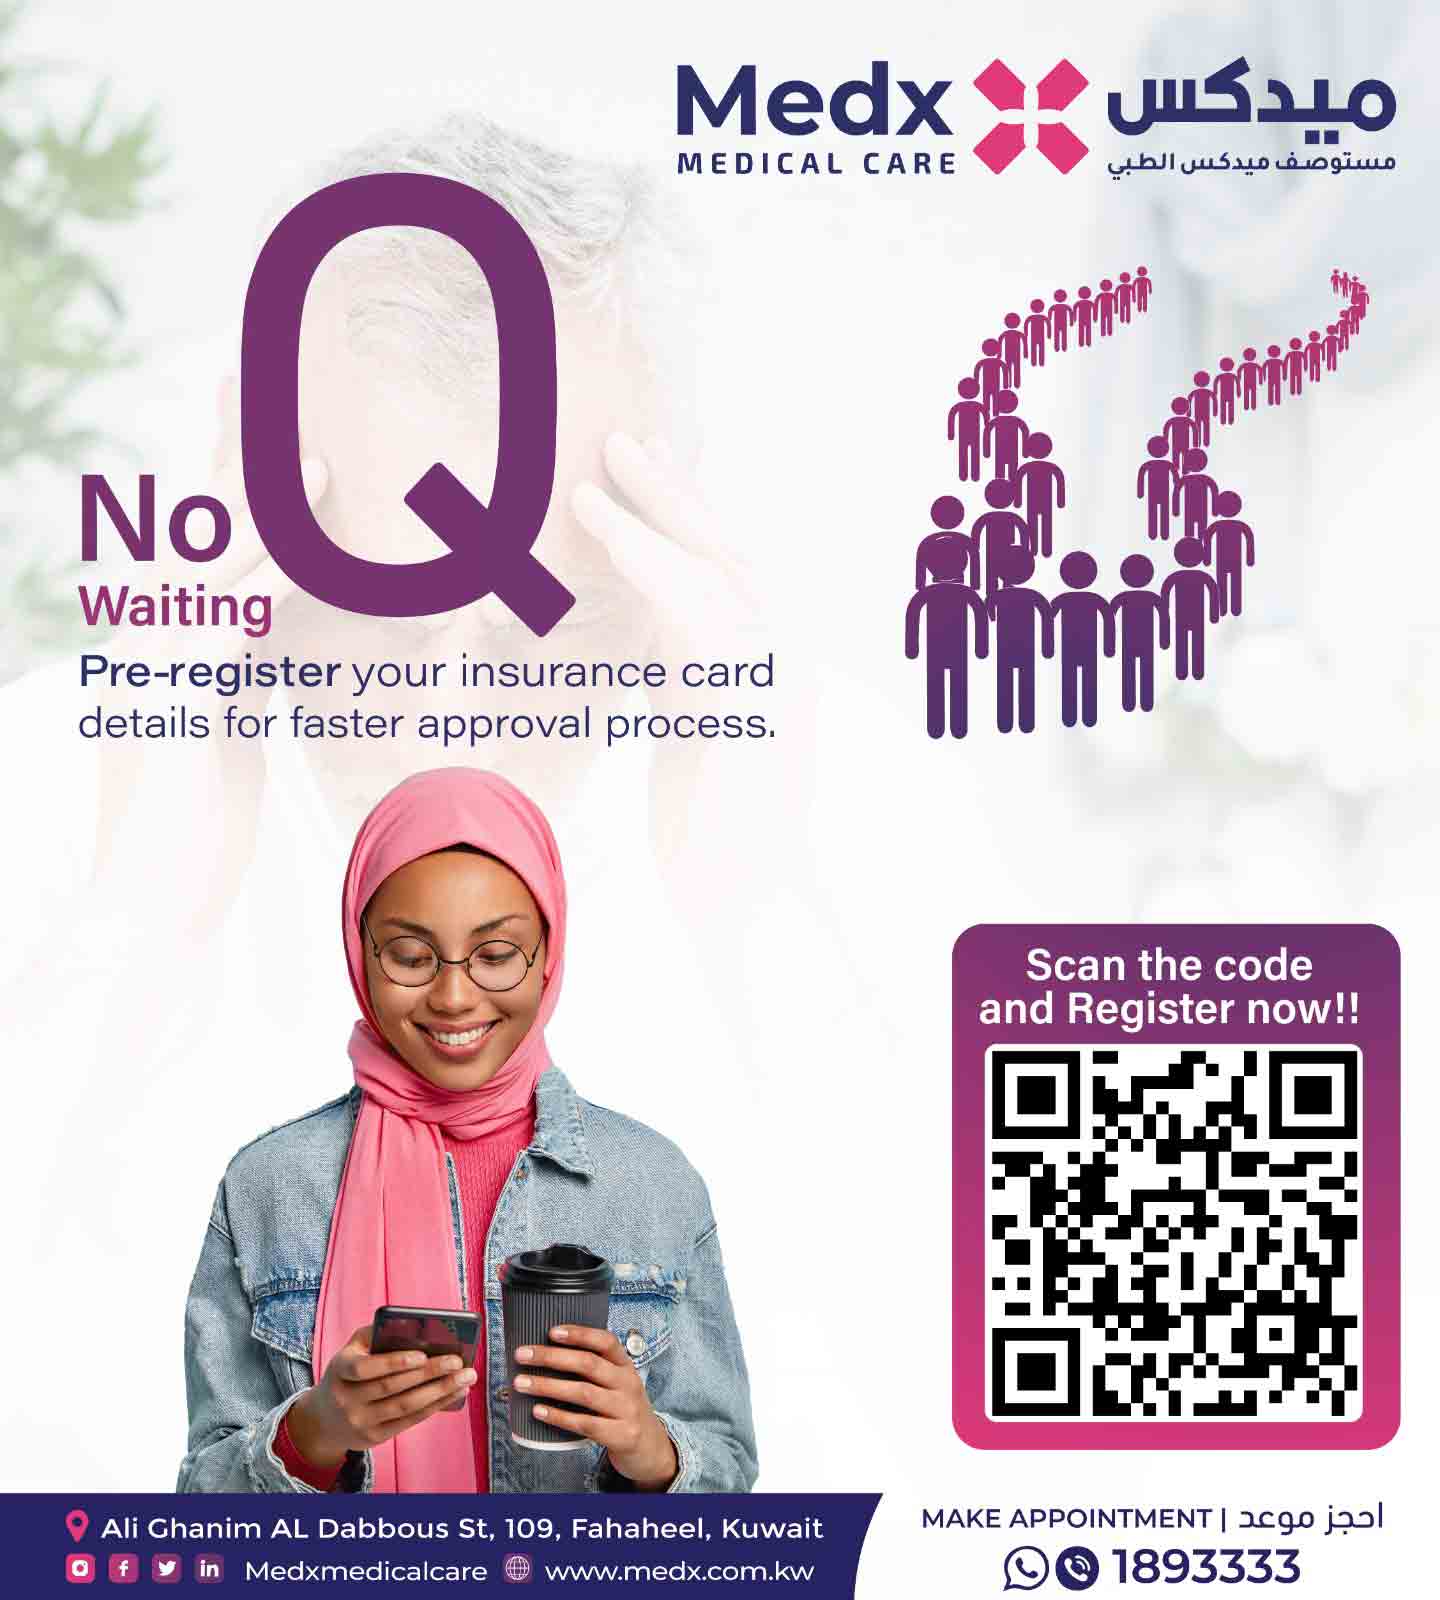 Medx Medical Care center Fahaheel has launched Easy Q Insurance service 